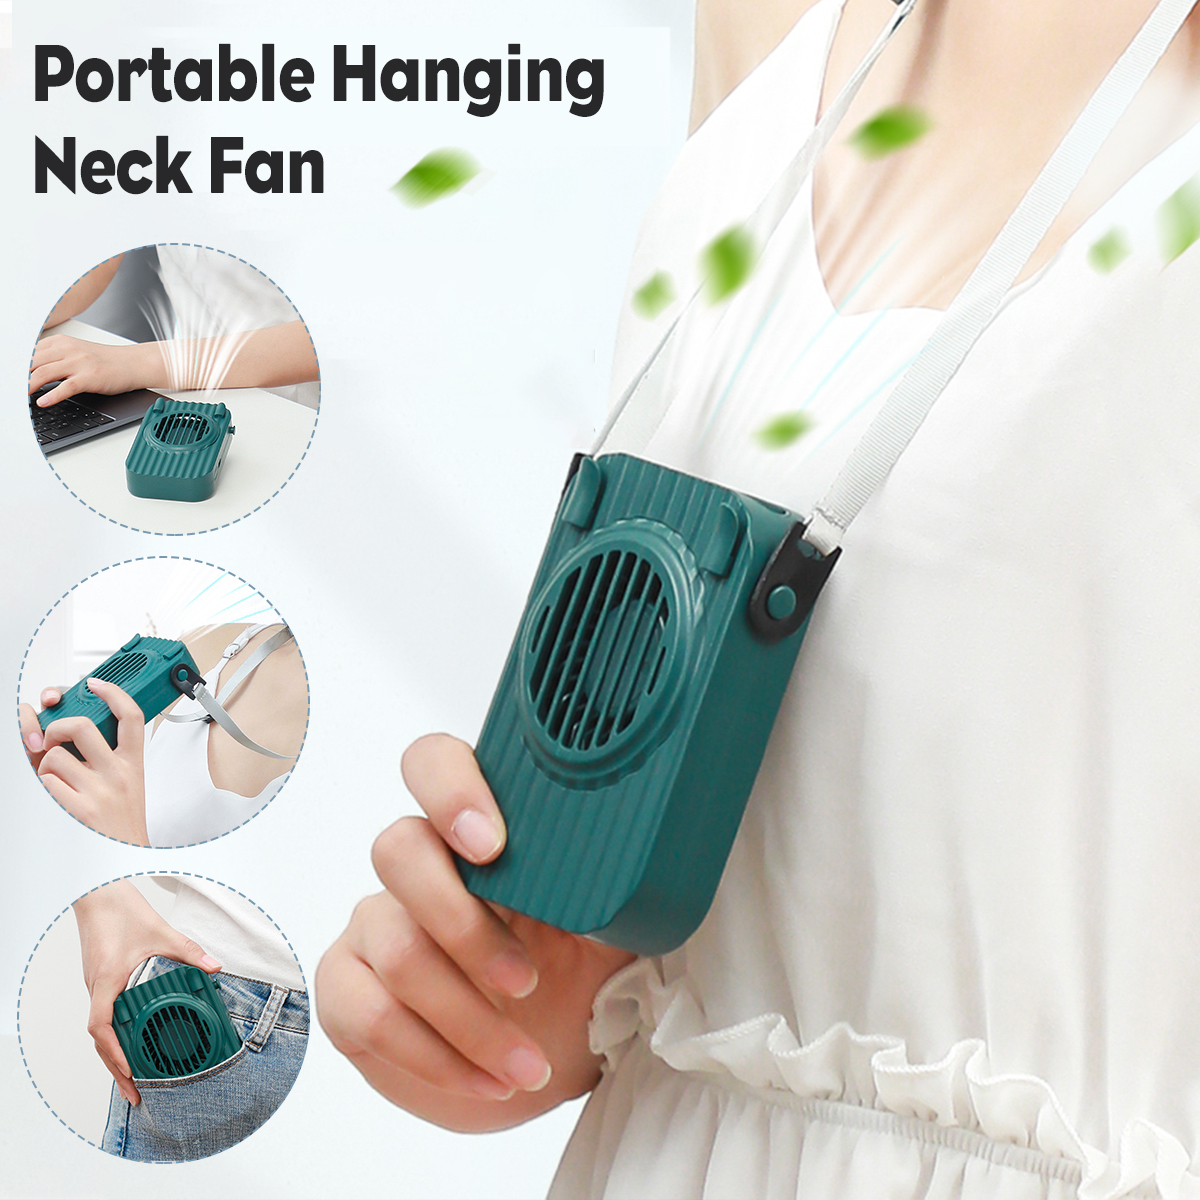 Hanging-Neck-Fan-Portable-Mini-3-Gears-Adjustable-USB-Air-Condition-Fan-Outdoor-Camping-Travel-1836589-4